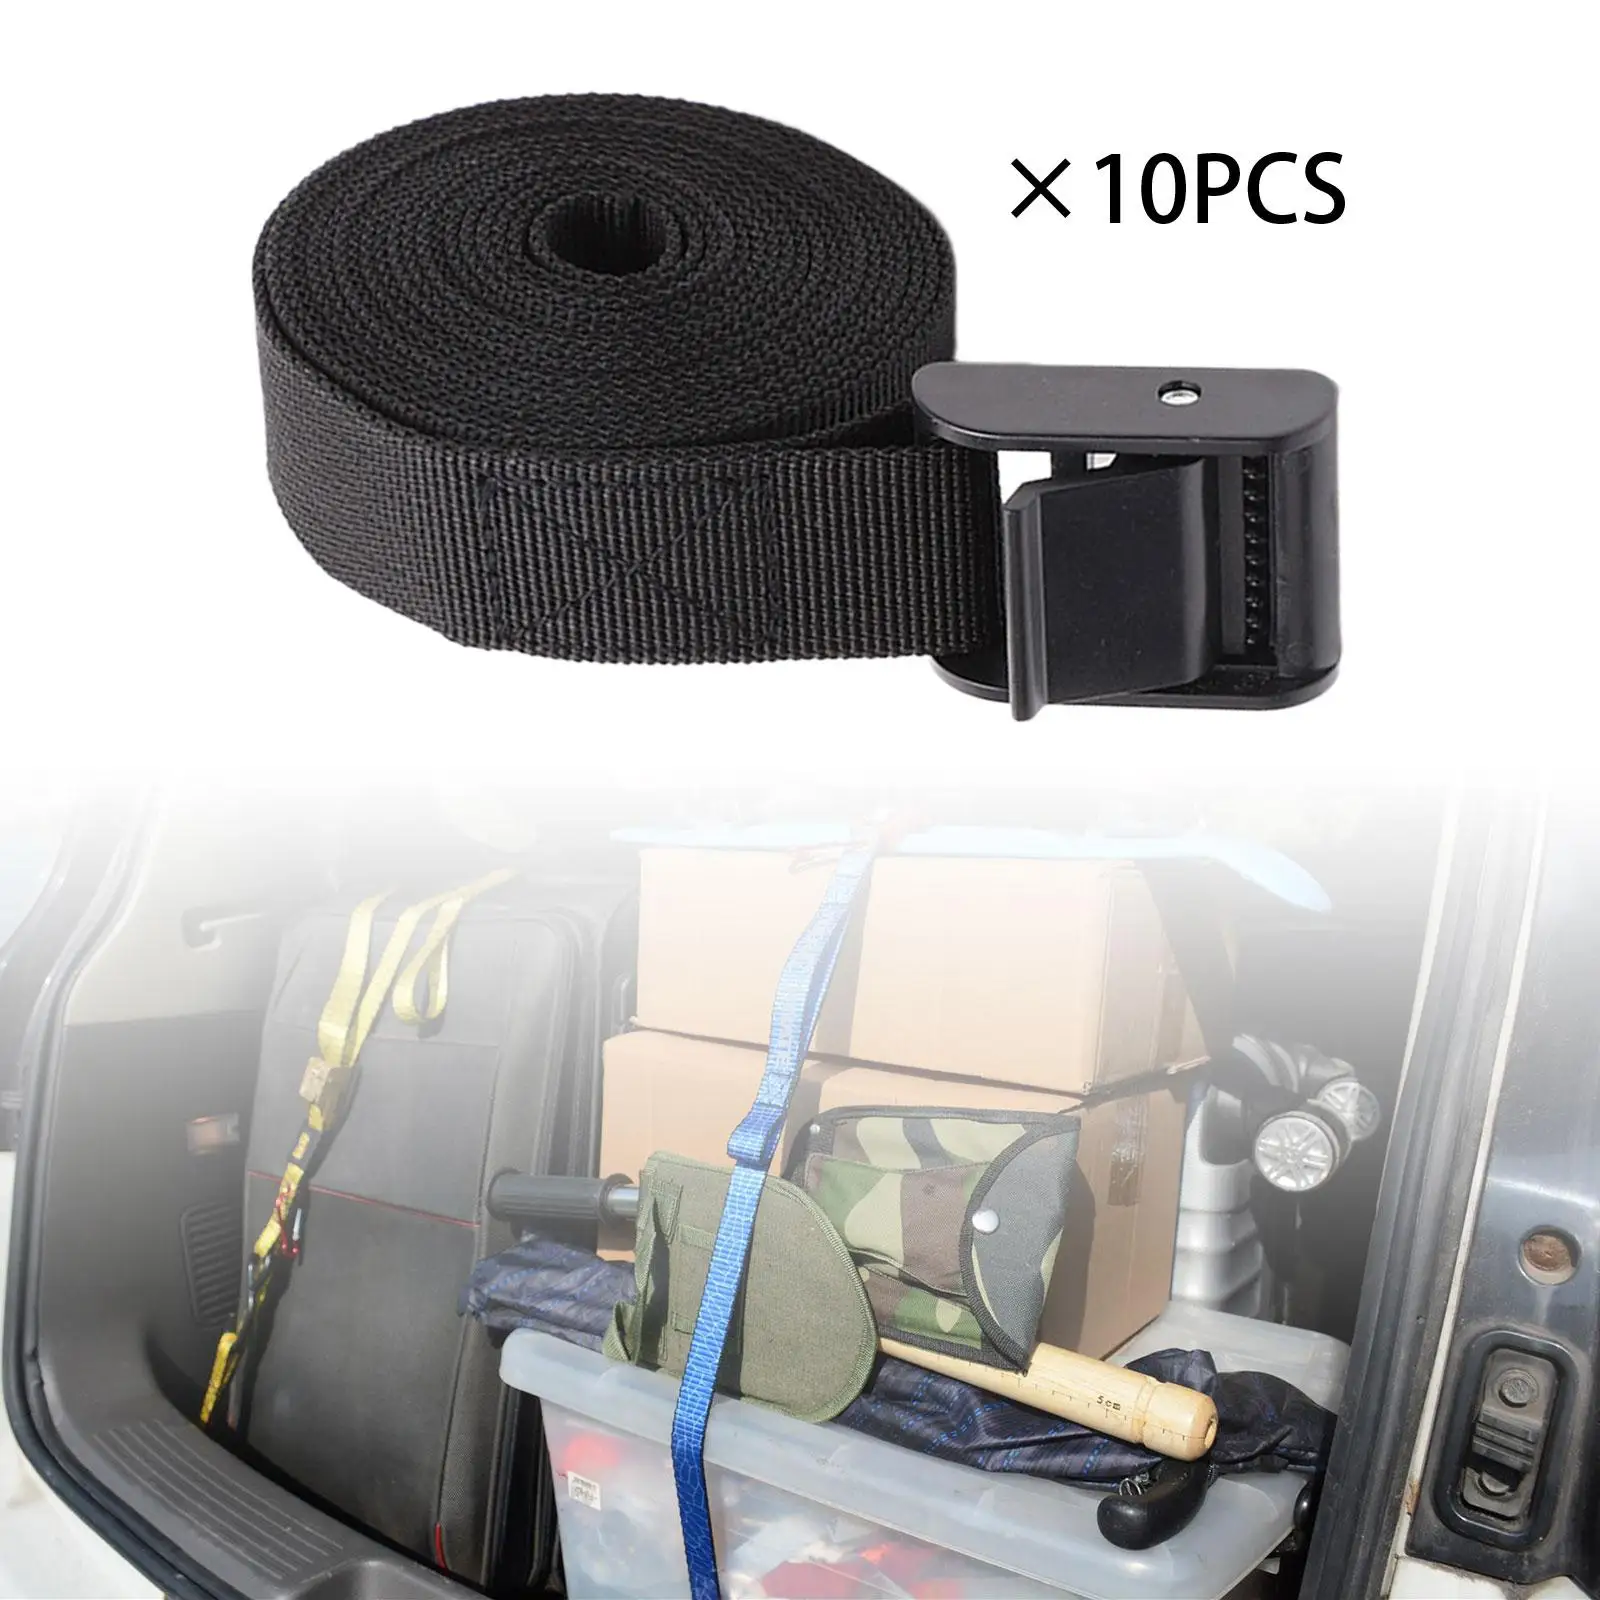 10 Pieces Cargo Securing Straps Lashing Straps 25x500mm High Density Webbing Multifunctional Black Roof Rack Straps for Bicycles